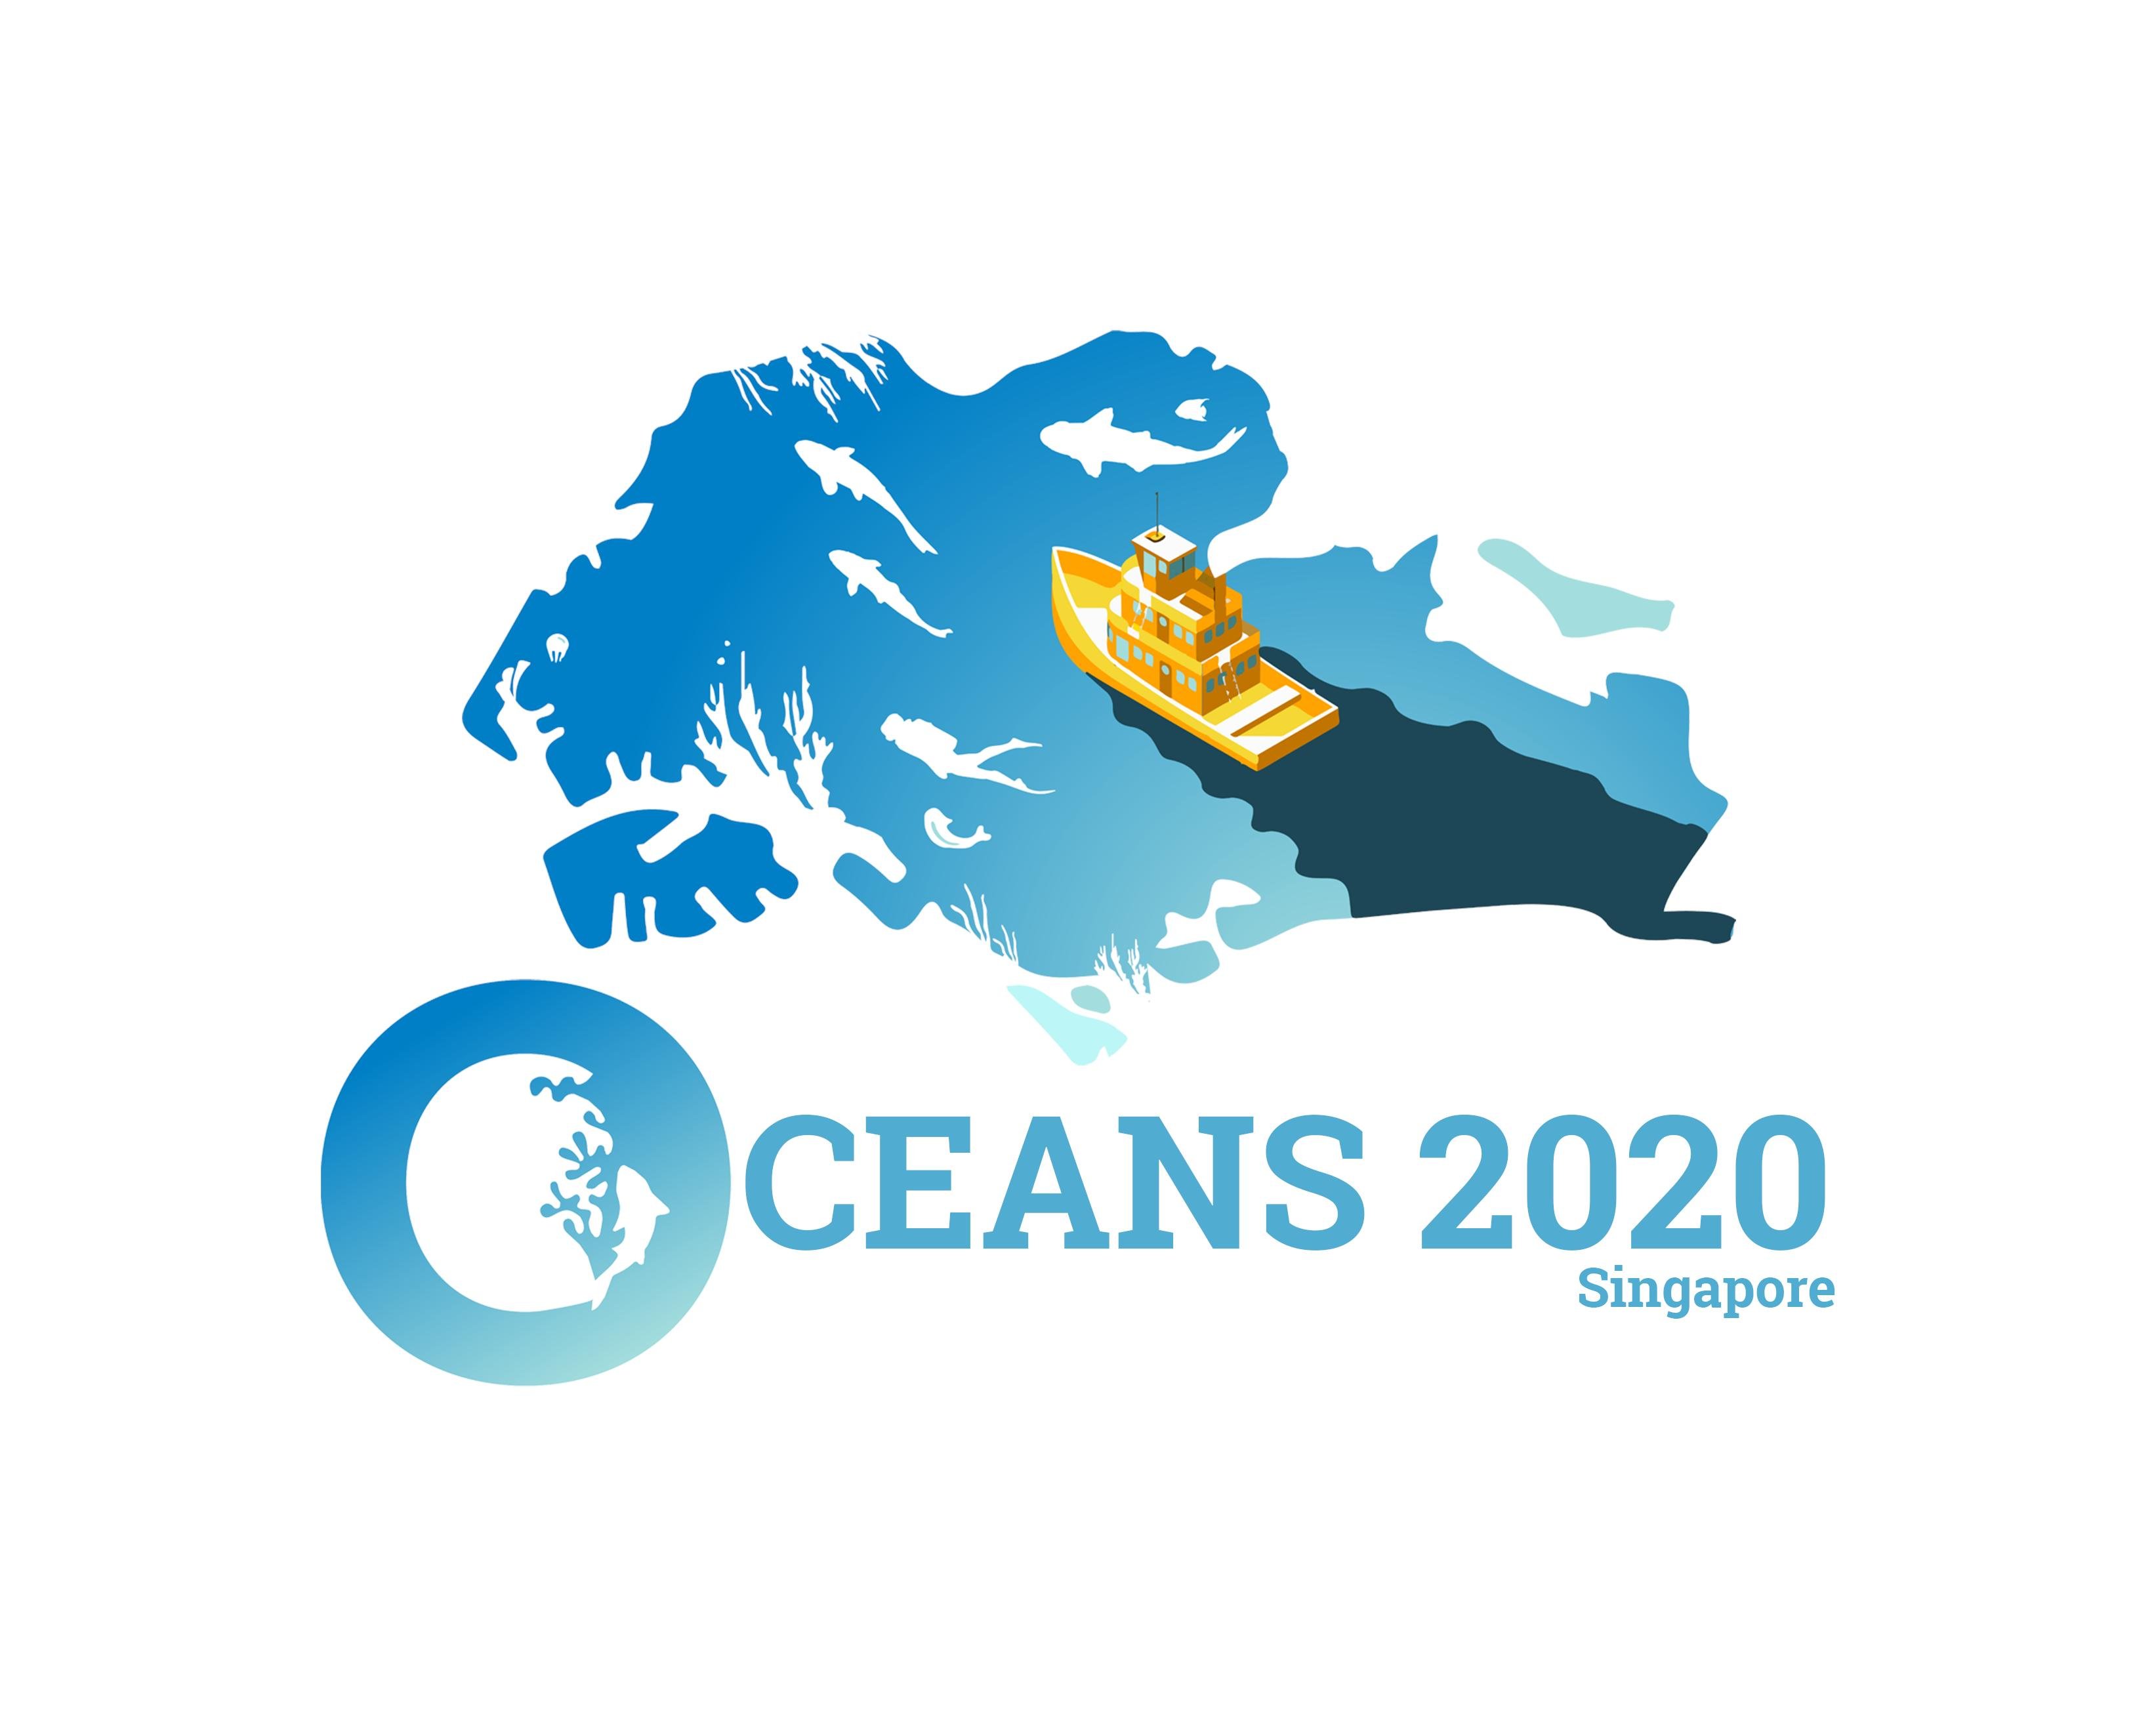 Join the leading innovators, analysts, and producers of marine technology, research, and education gathering for the OCEANS 2020 Singapore conference.